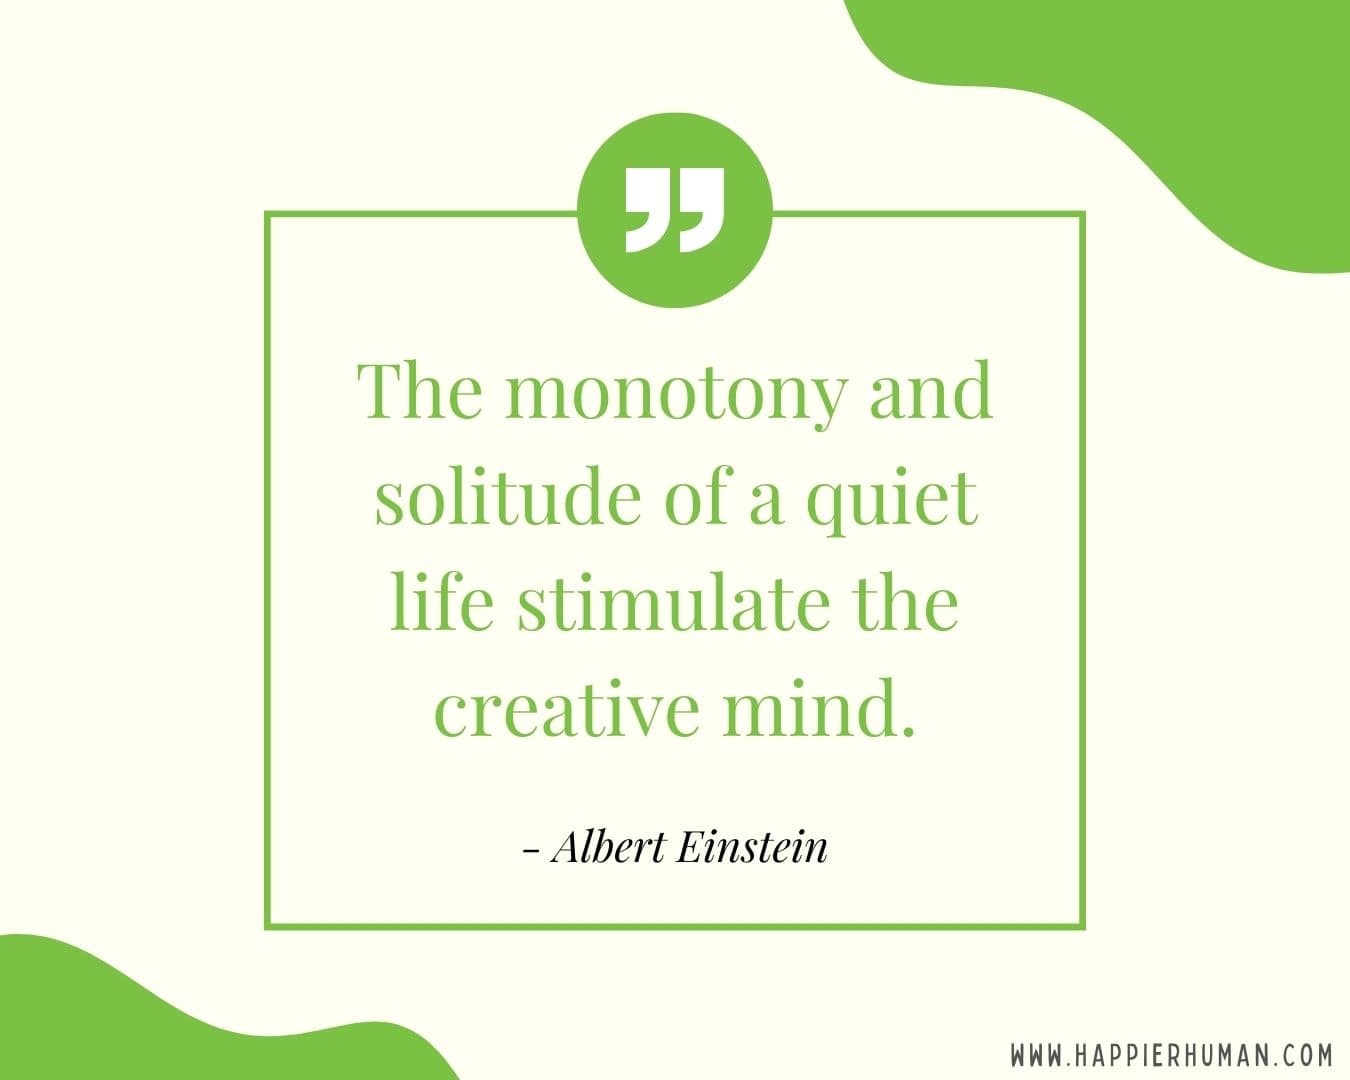 Introvert Quotes - “The monotony and solitude of a quiet life stimulate the creative mind.” – Albert Einstein